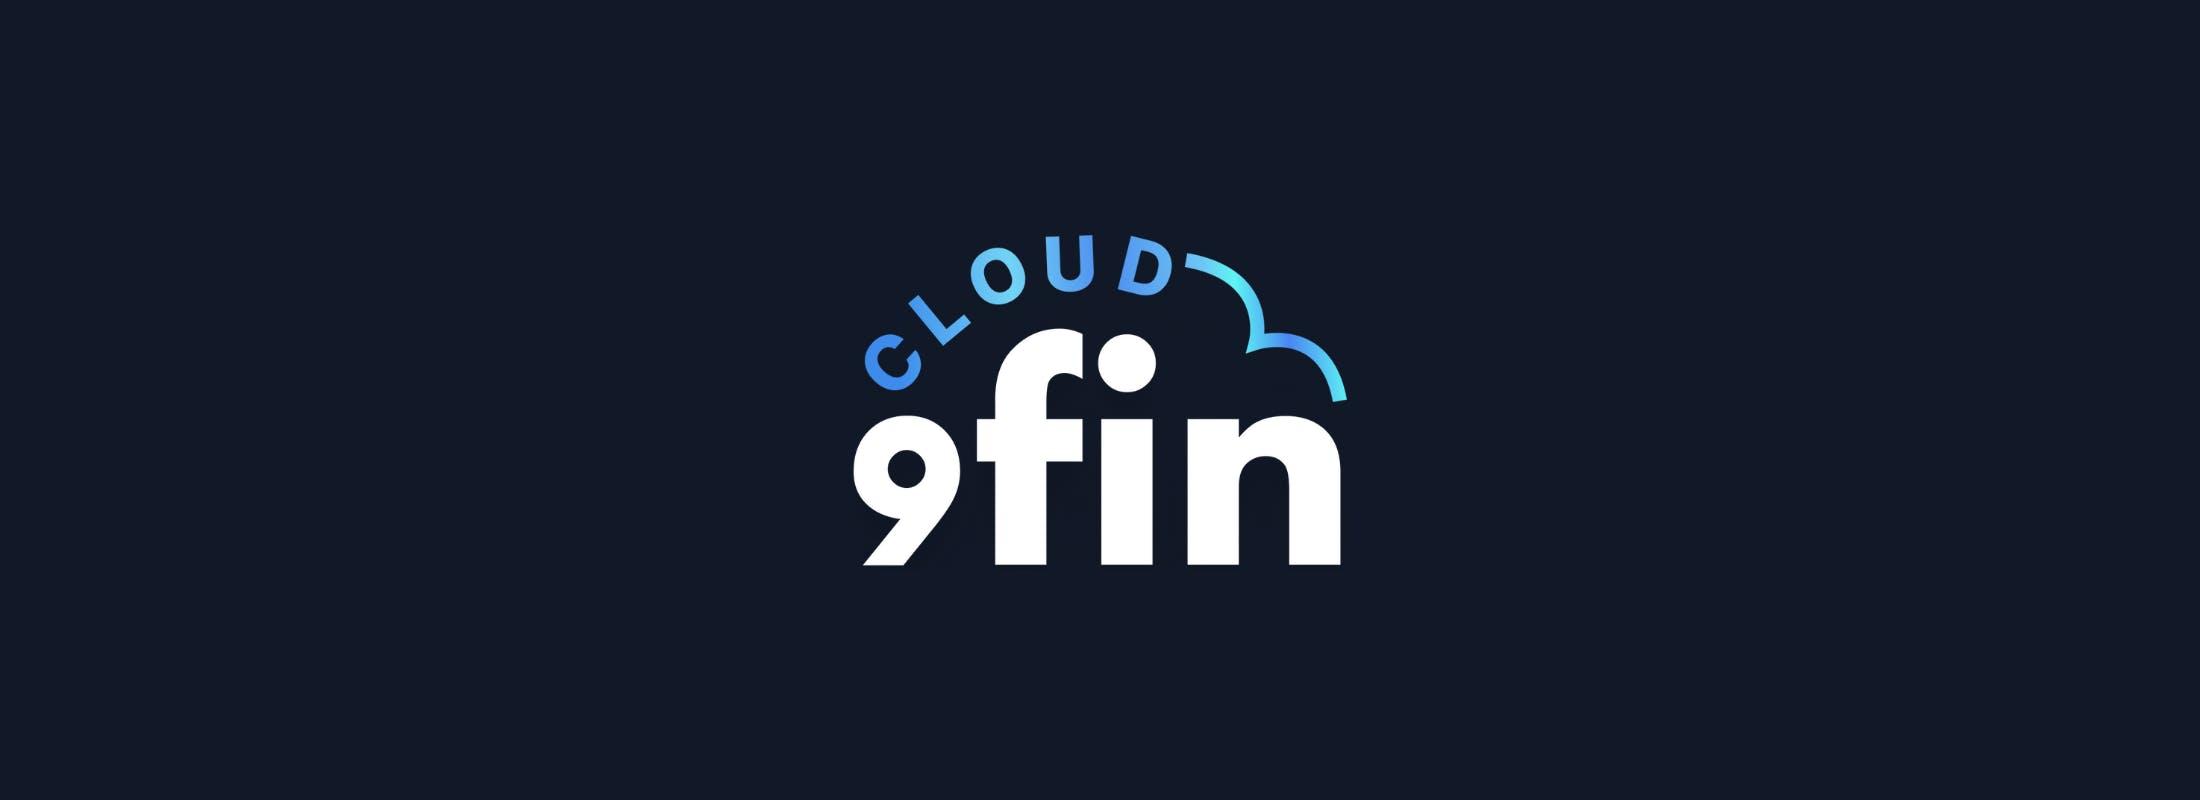 Cloud 9fin — What does the UK election mean for credit?